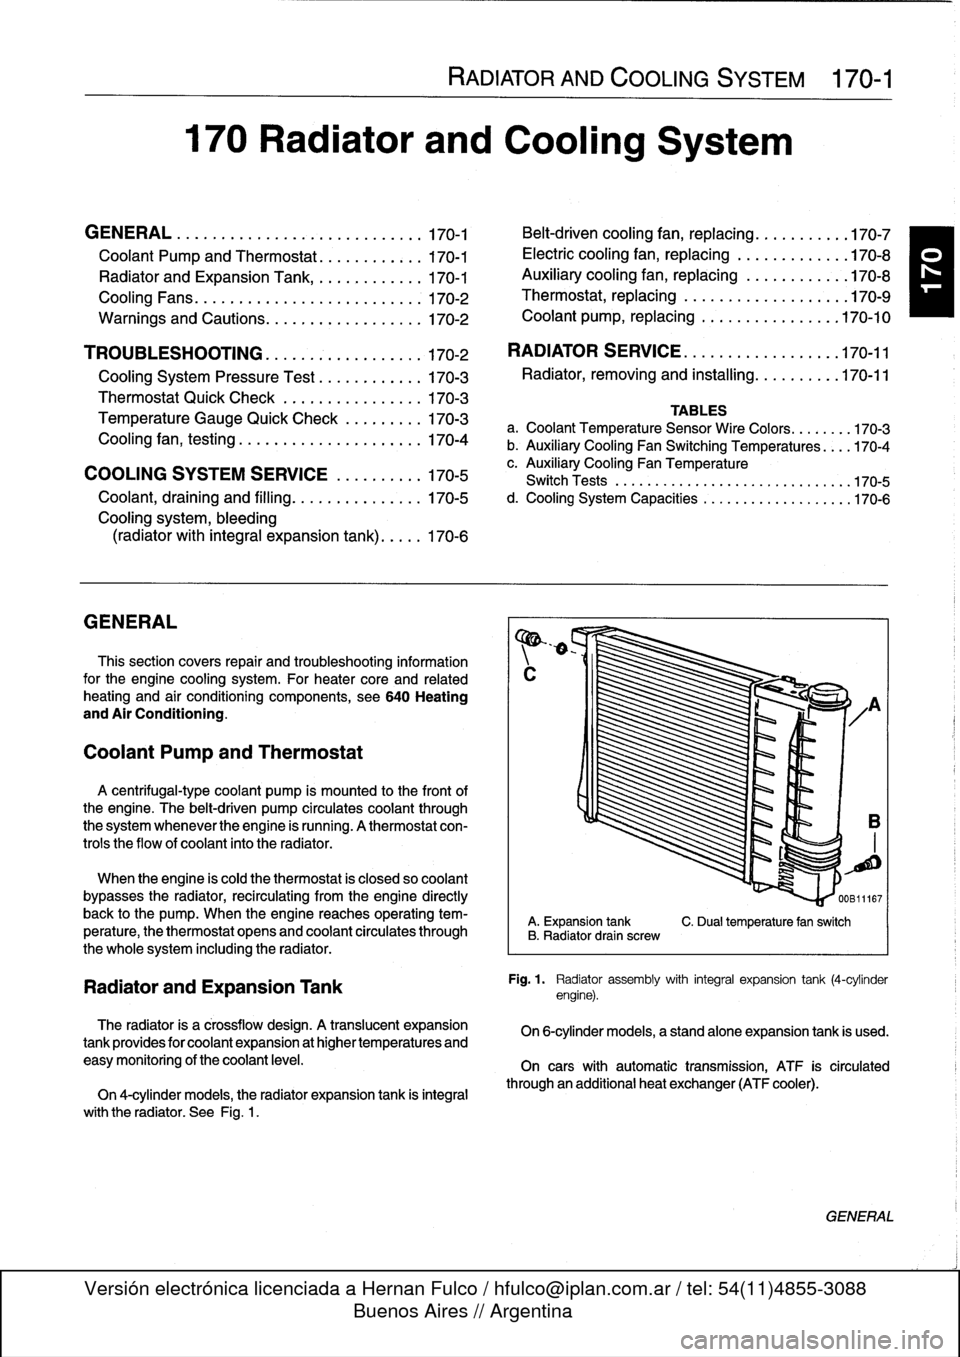 BMW 318i 1994 E36 Workshop Manual 170
Radiator
and
Cooling
System

GENERAL
.
.
.....
.
...
.
.
.
.
.
....
.
.
.
.
.
.
.
.170-1

Coolant
Pump
and
Thermostat
........
.
.
.
.
170-1

Radiator
and
Expansion
Tank
.........
.
...
170-1

Coo